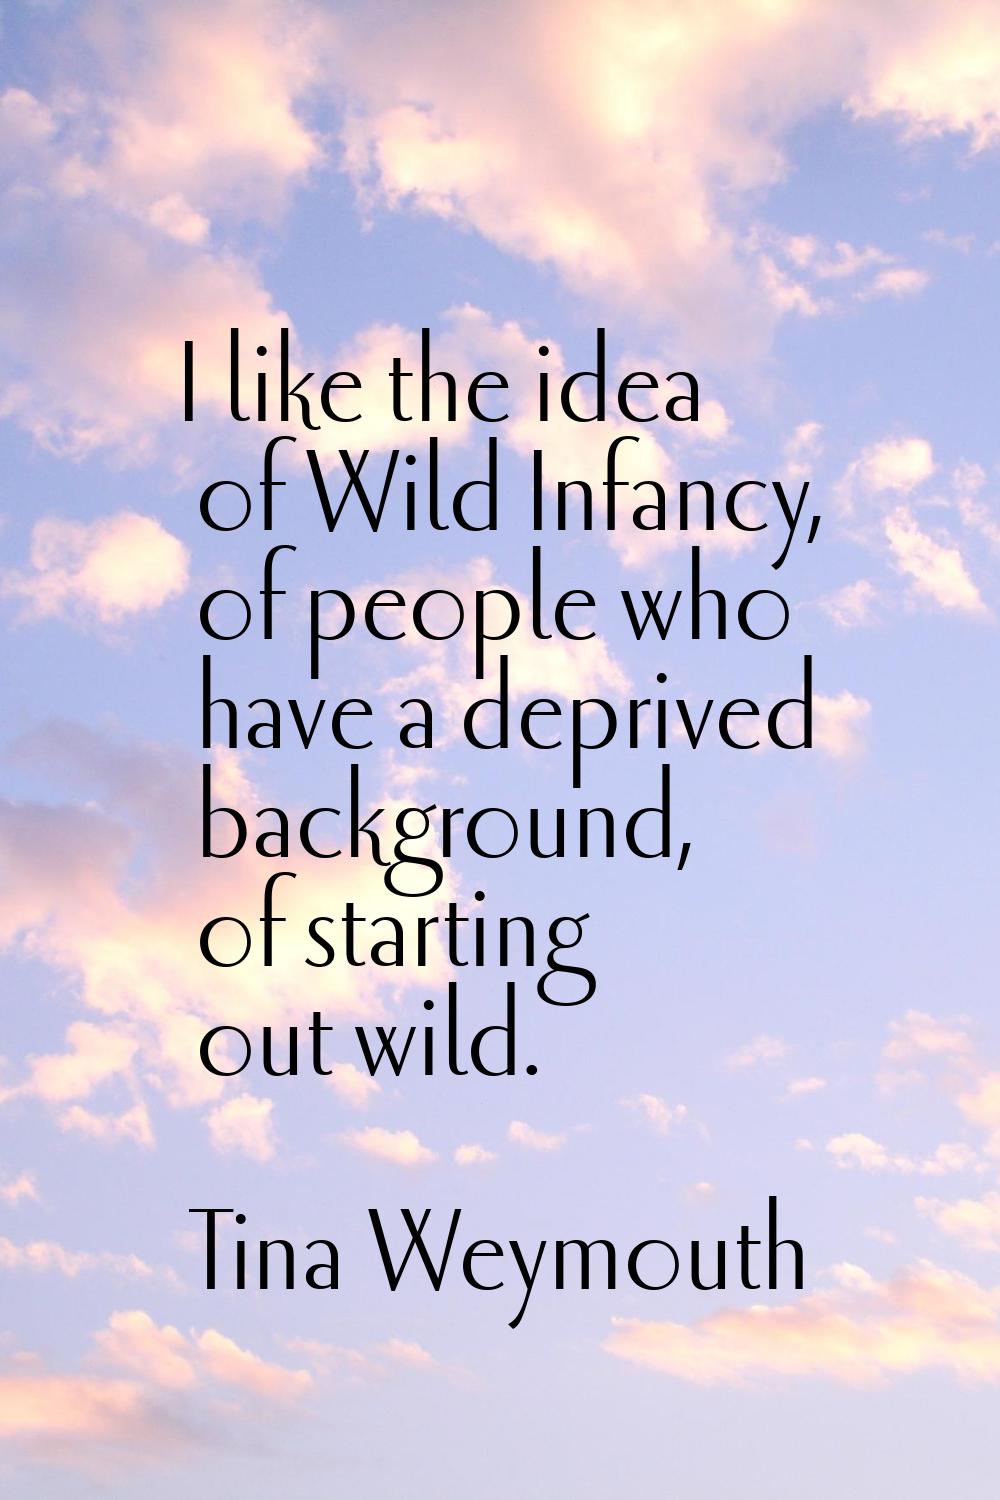 I like the idea of Wild Infancy, of people who have a deprived background, of starting out wild.